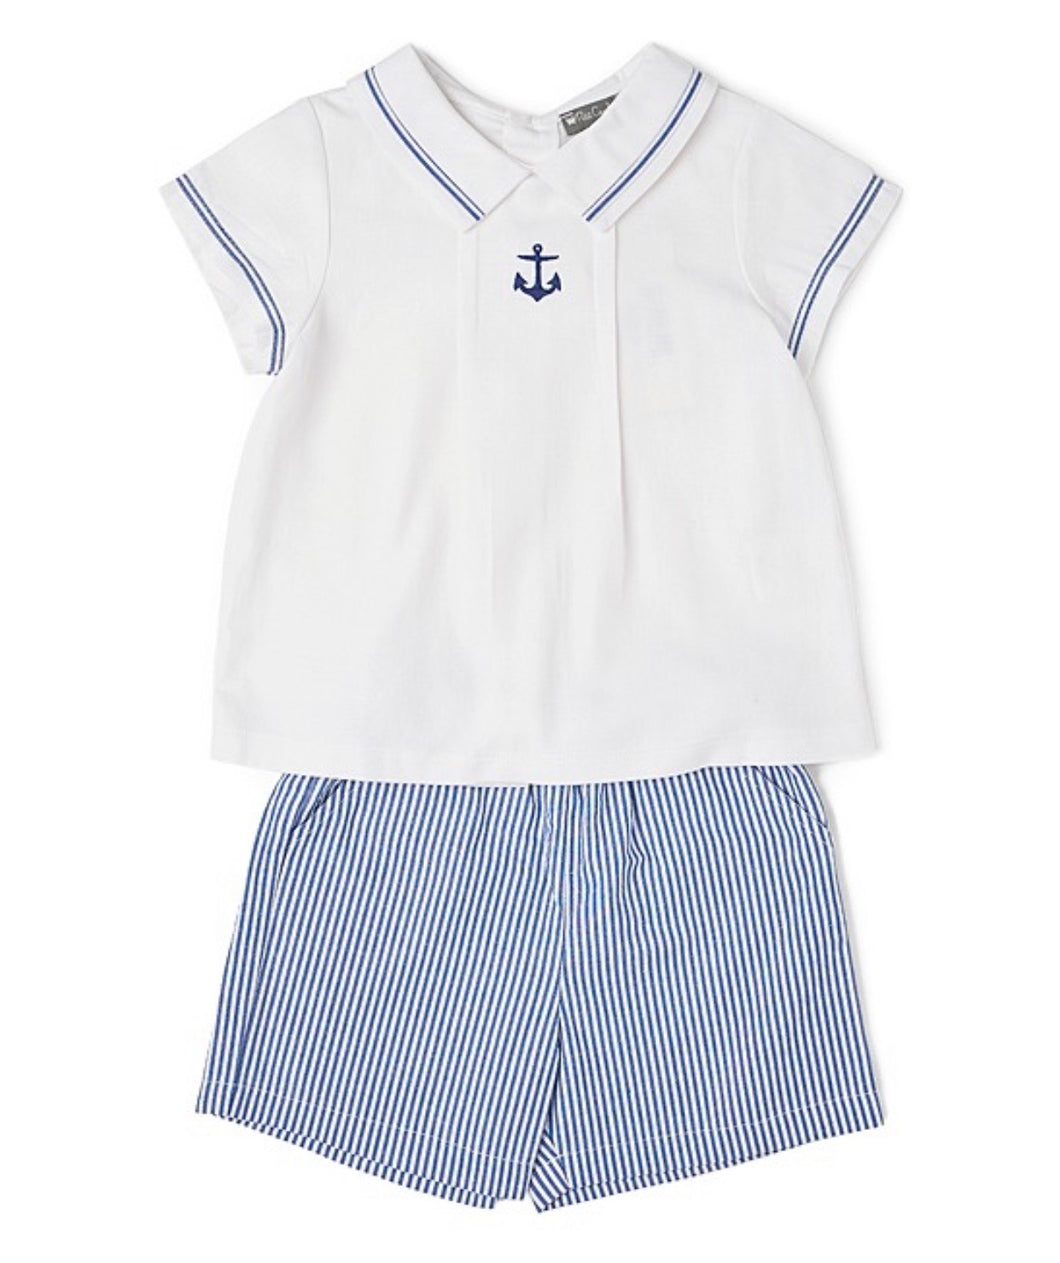 Avery's Anchors Away Embroidered Polo & Shorts